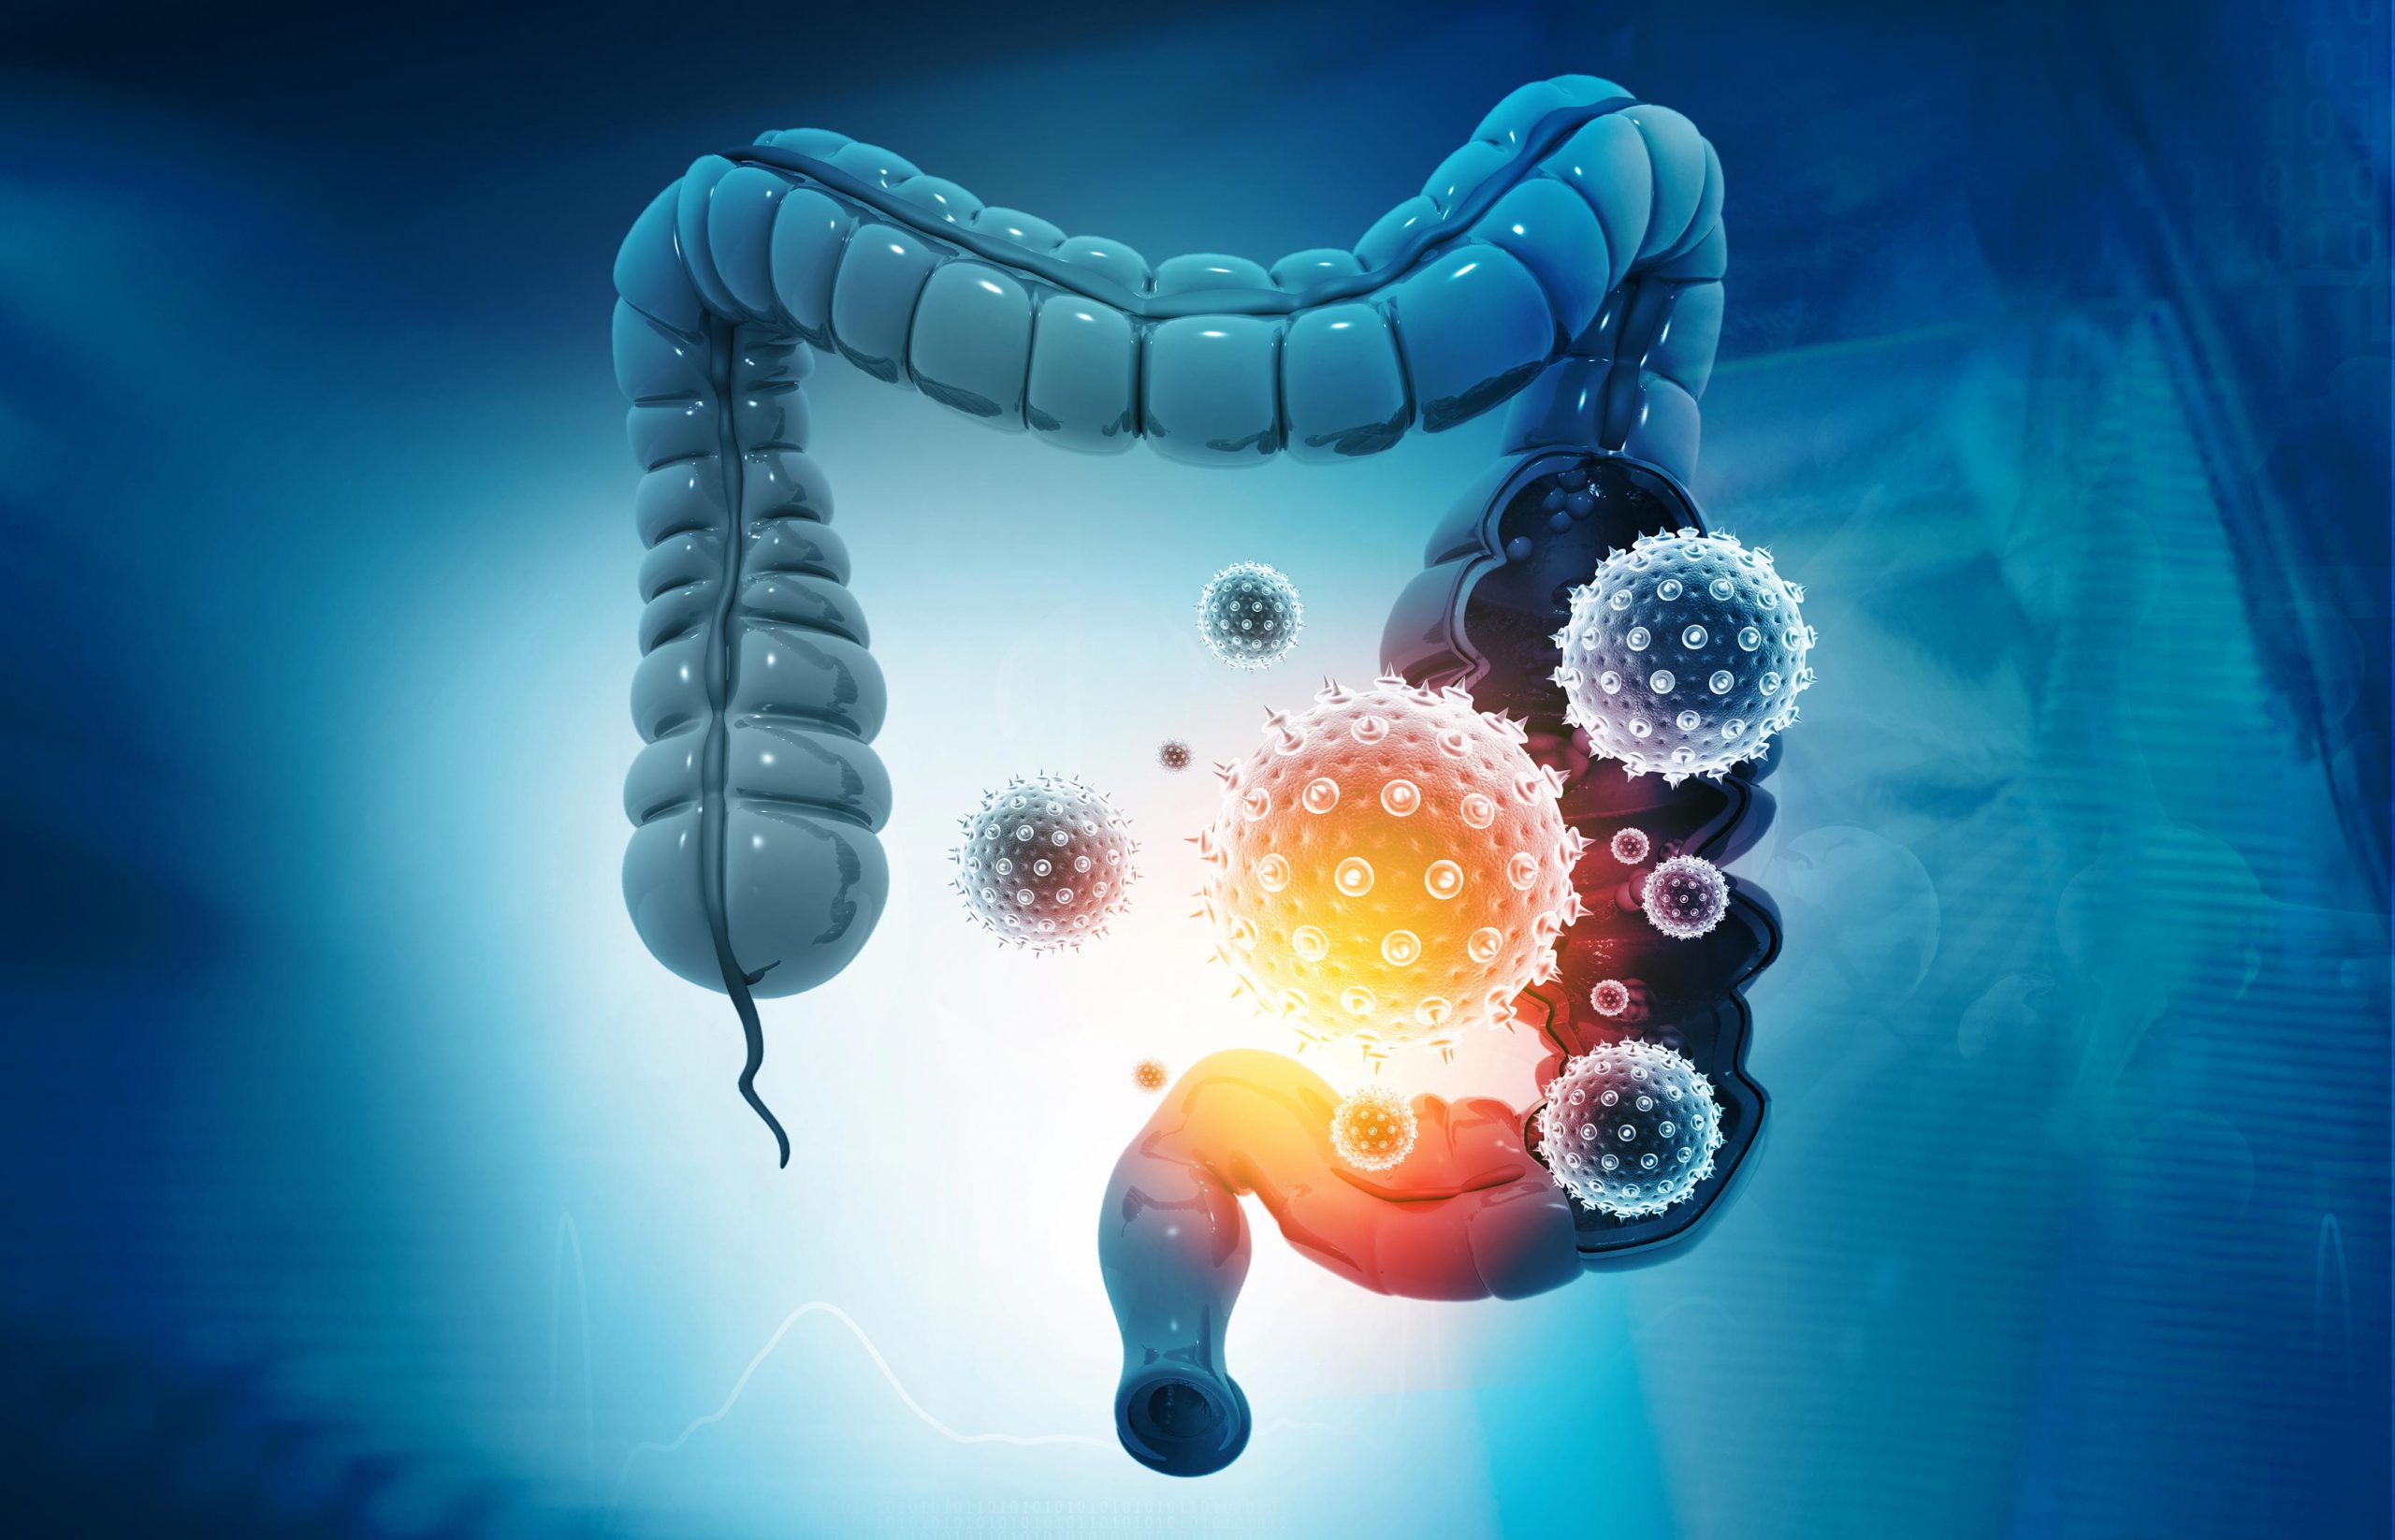 Make-Up of Gut Microbiome May Be Linked to Long Covid Risk